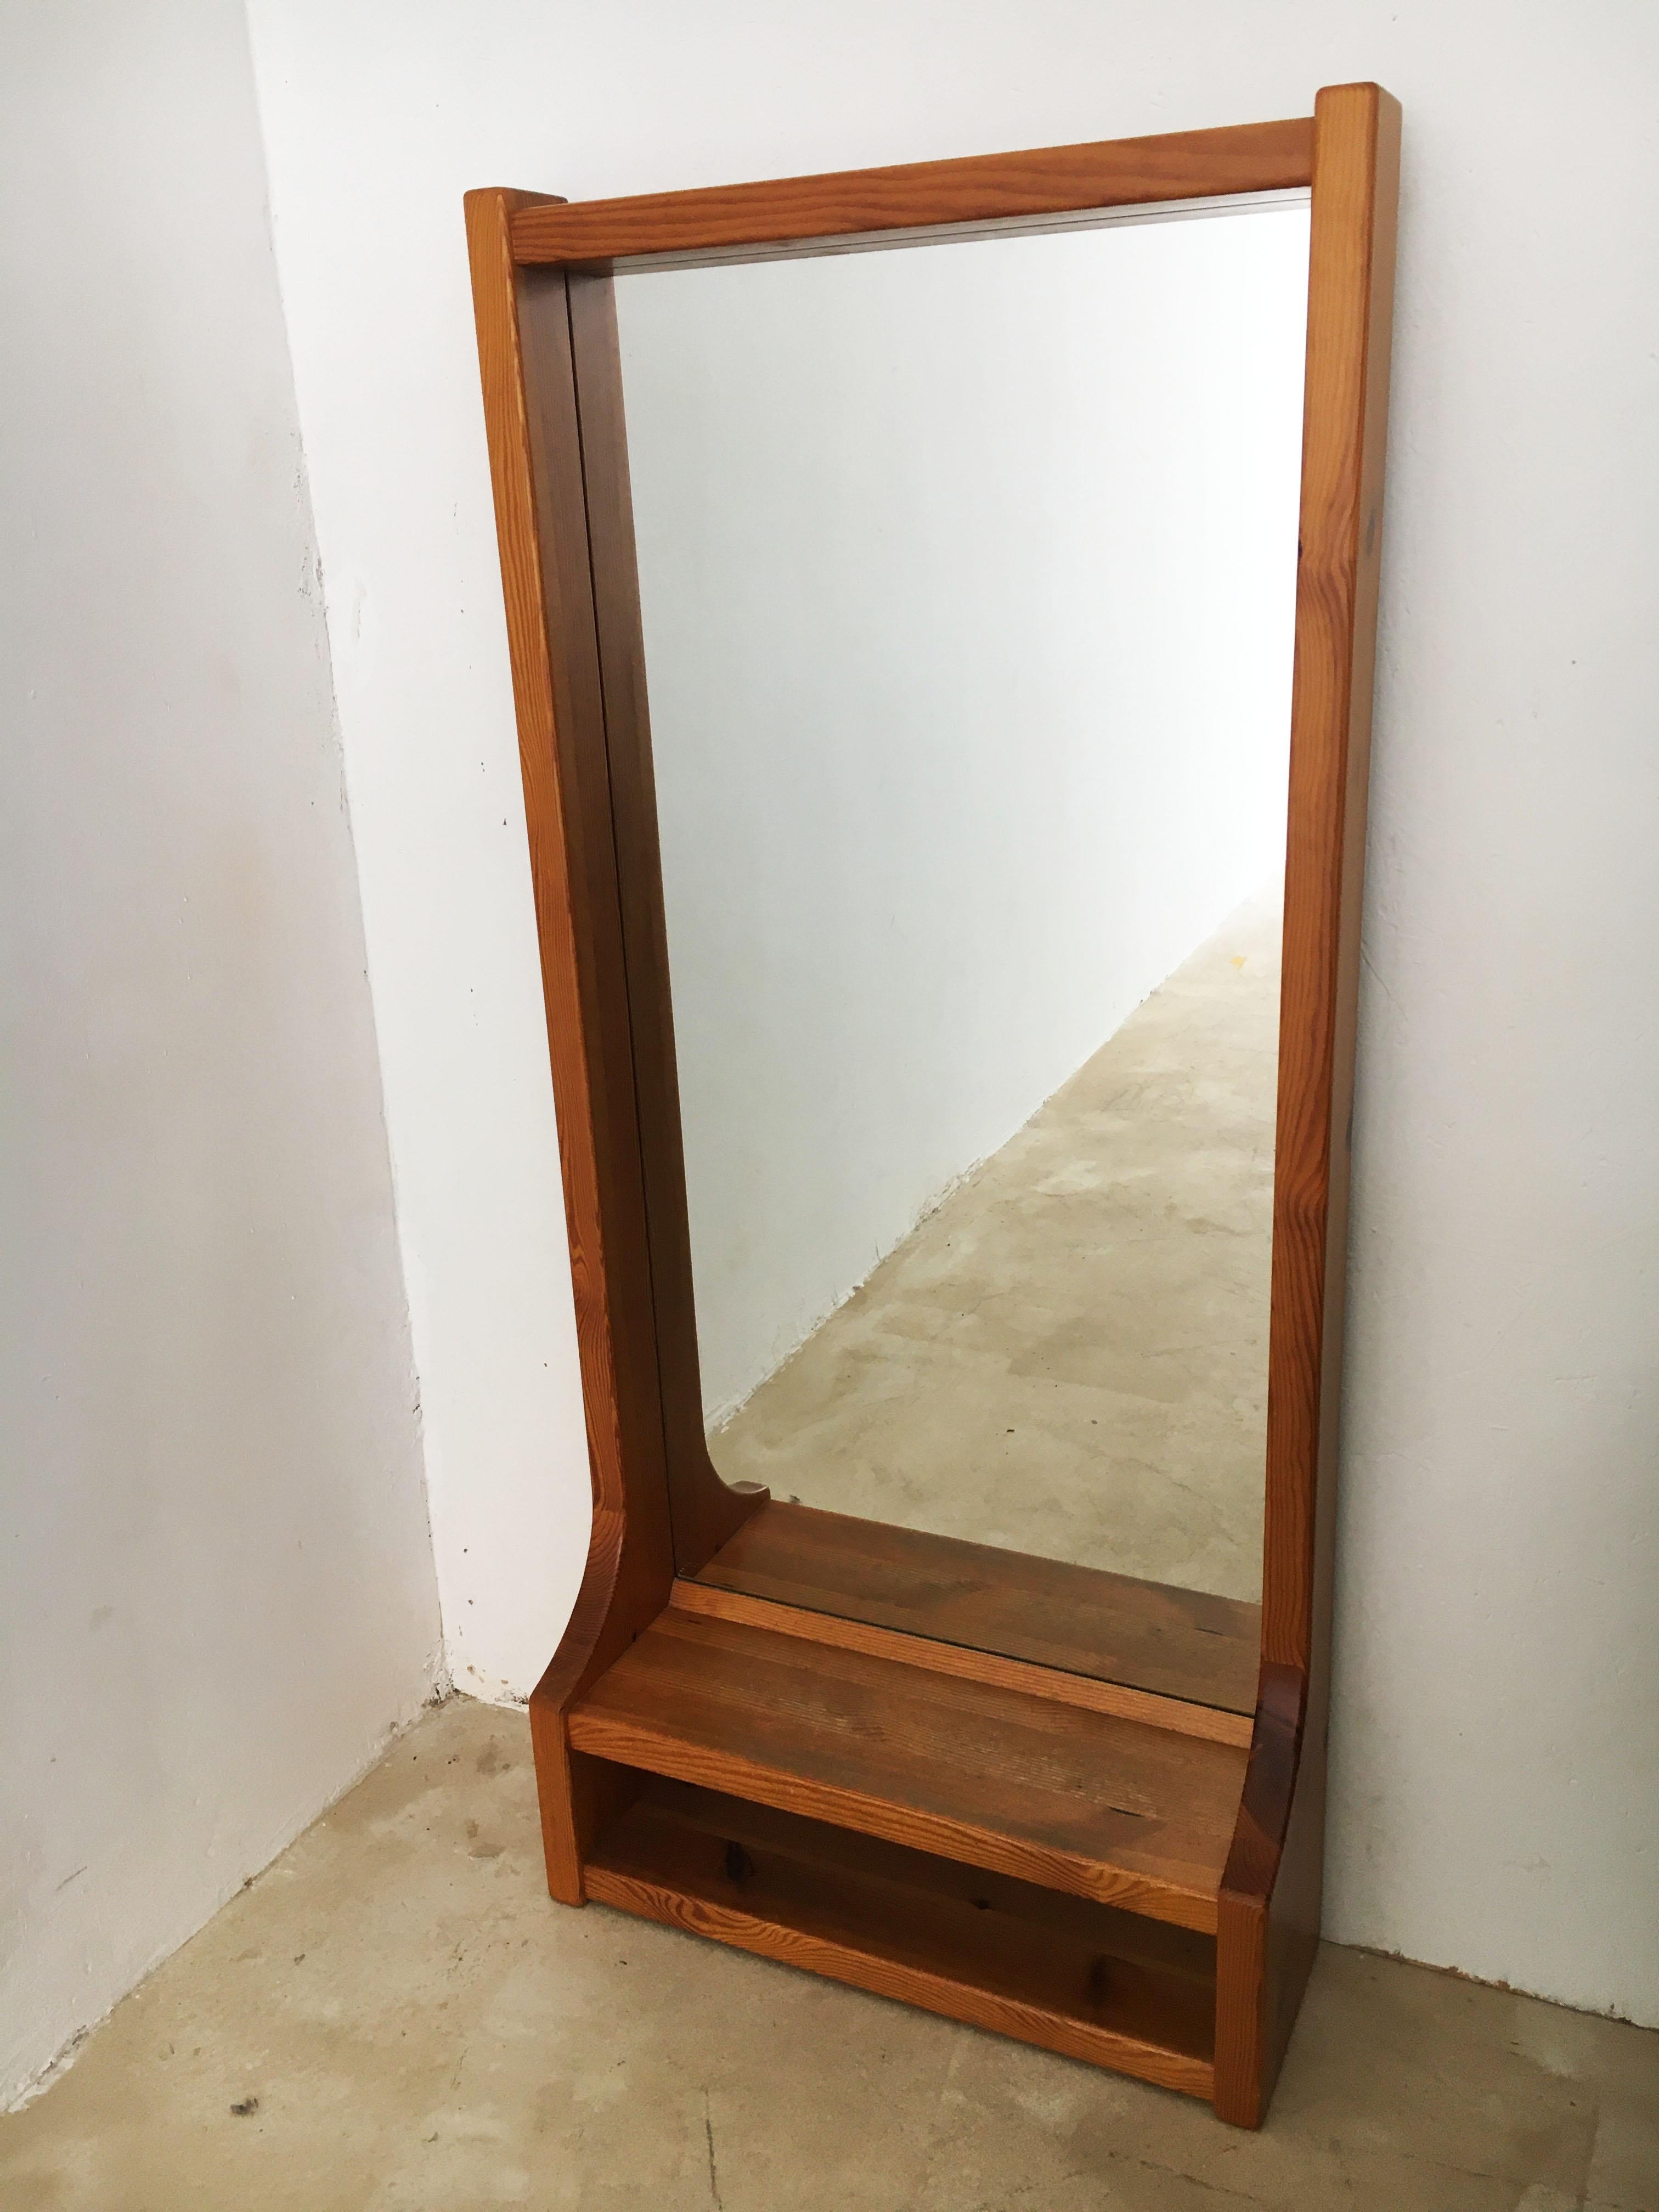 Late 20th Century Modern Floating Wall Mirror with Shelf by Glas Mäster in Markaryd, Sweden, 1970s For Sale